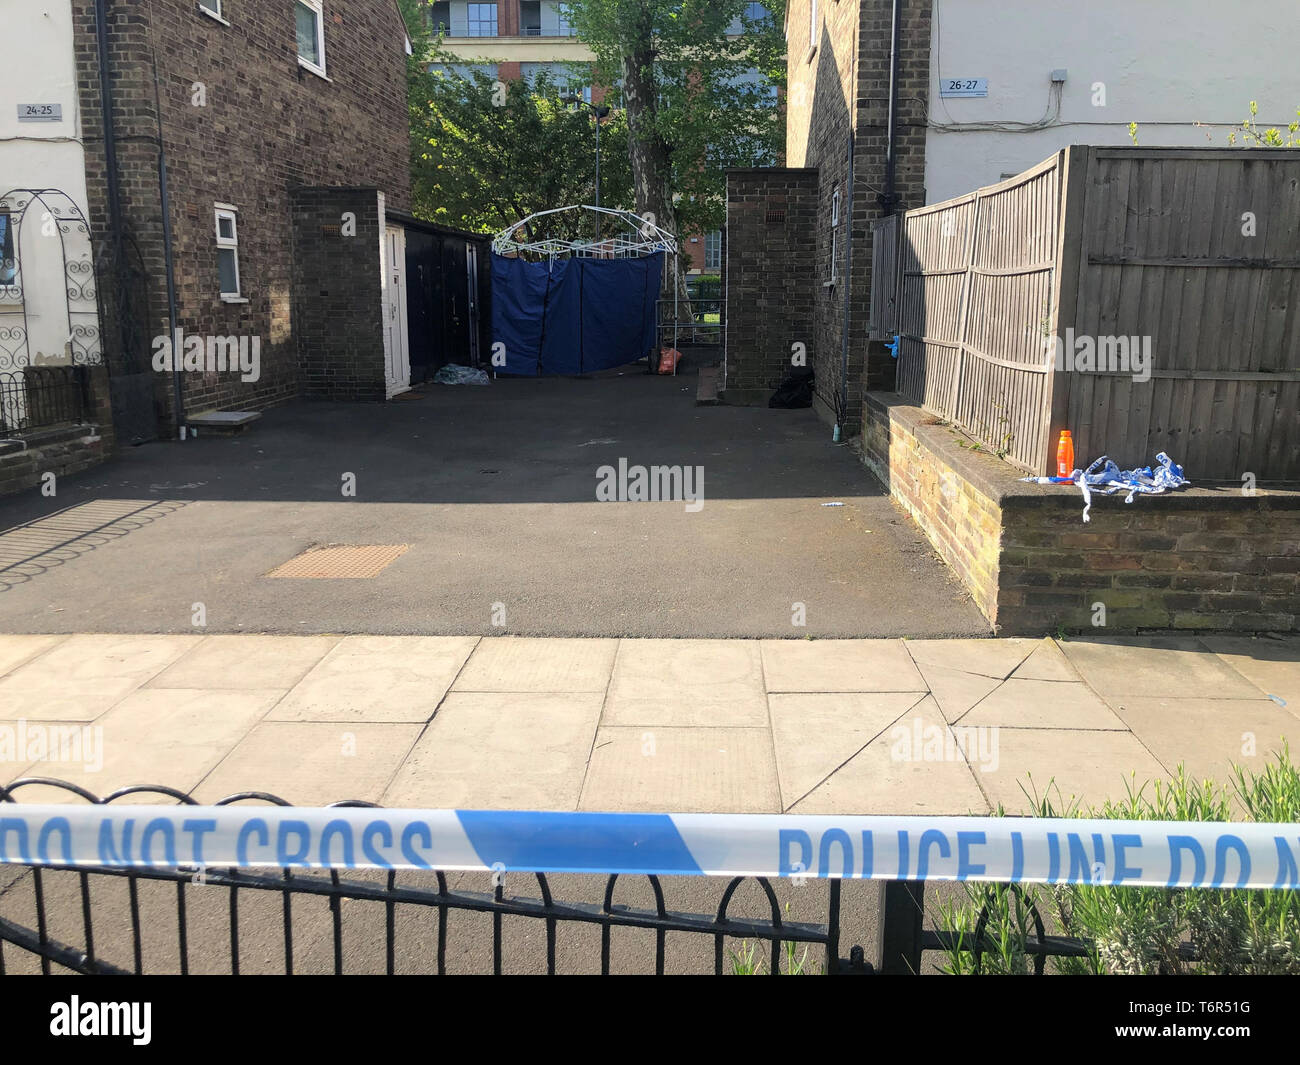 The scene at Somerford Grove in Hackney, east London, where a boy believed to be 15 years old has been stabbed to death. Police were called to the scene on Wednesday evening to reports of a stabbing. Stock Photo